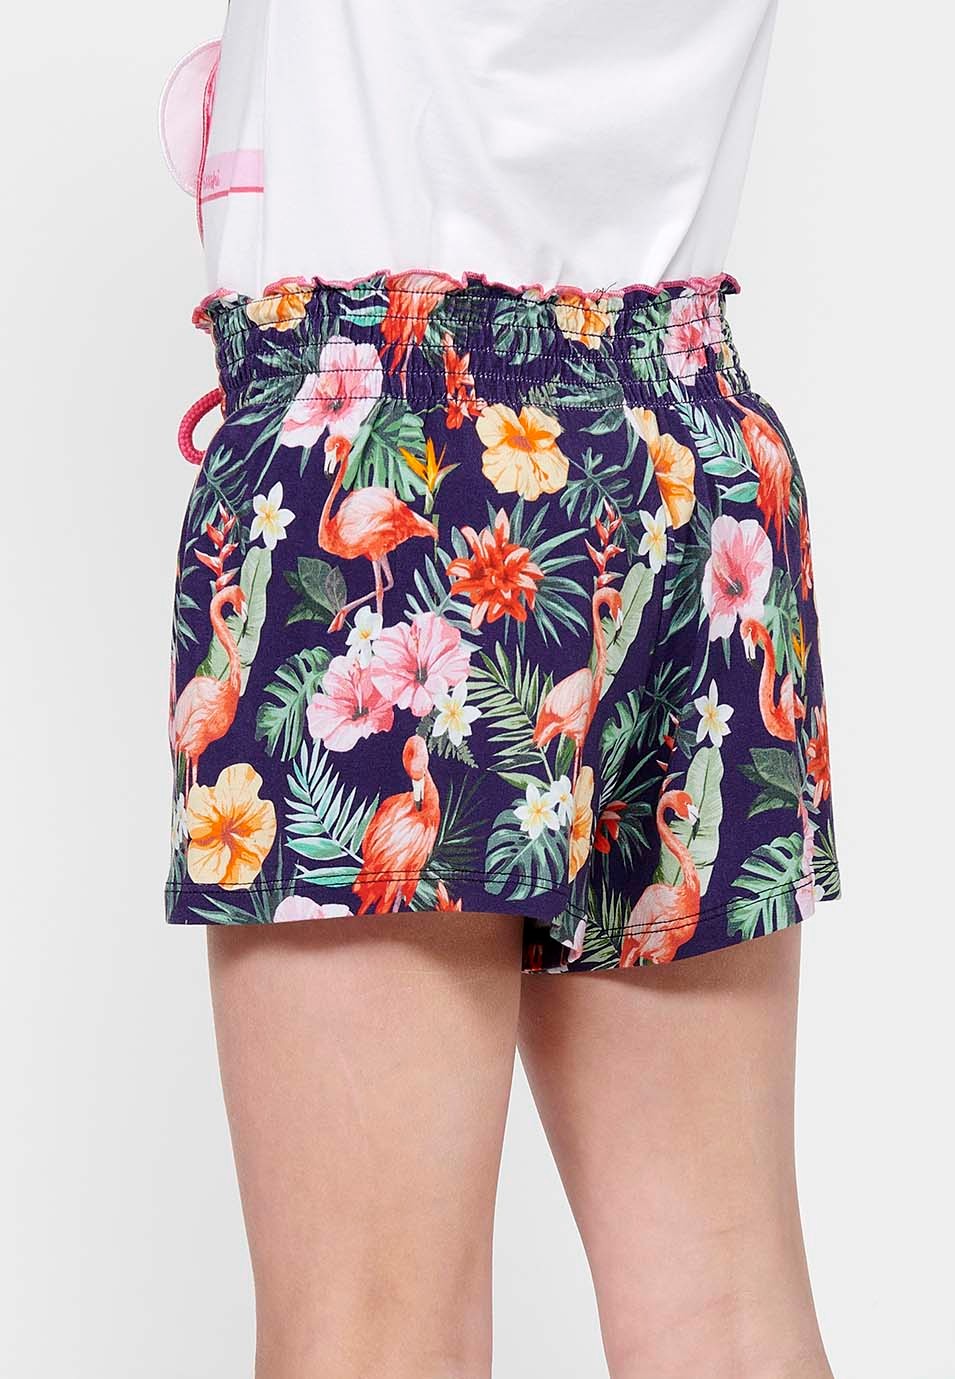 Pack of two shorts, one of them with a floral print and both with a wide elastic waistband and Multicolor drawstring for Girls 6